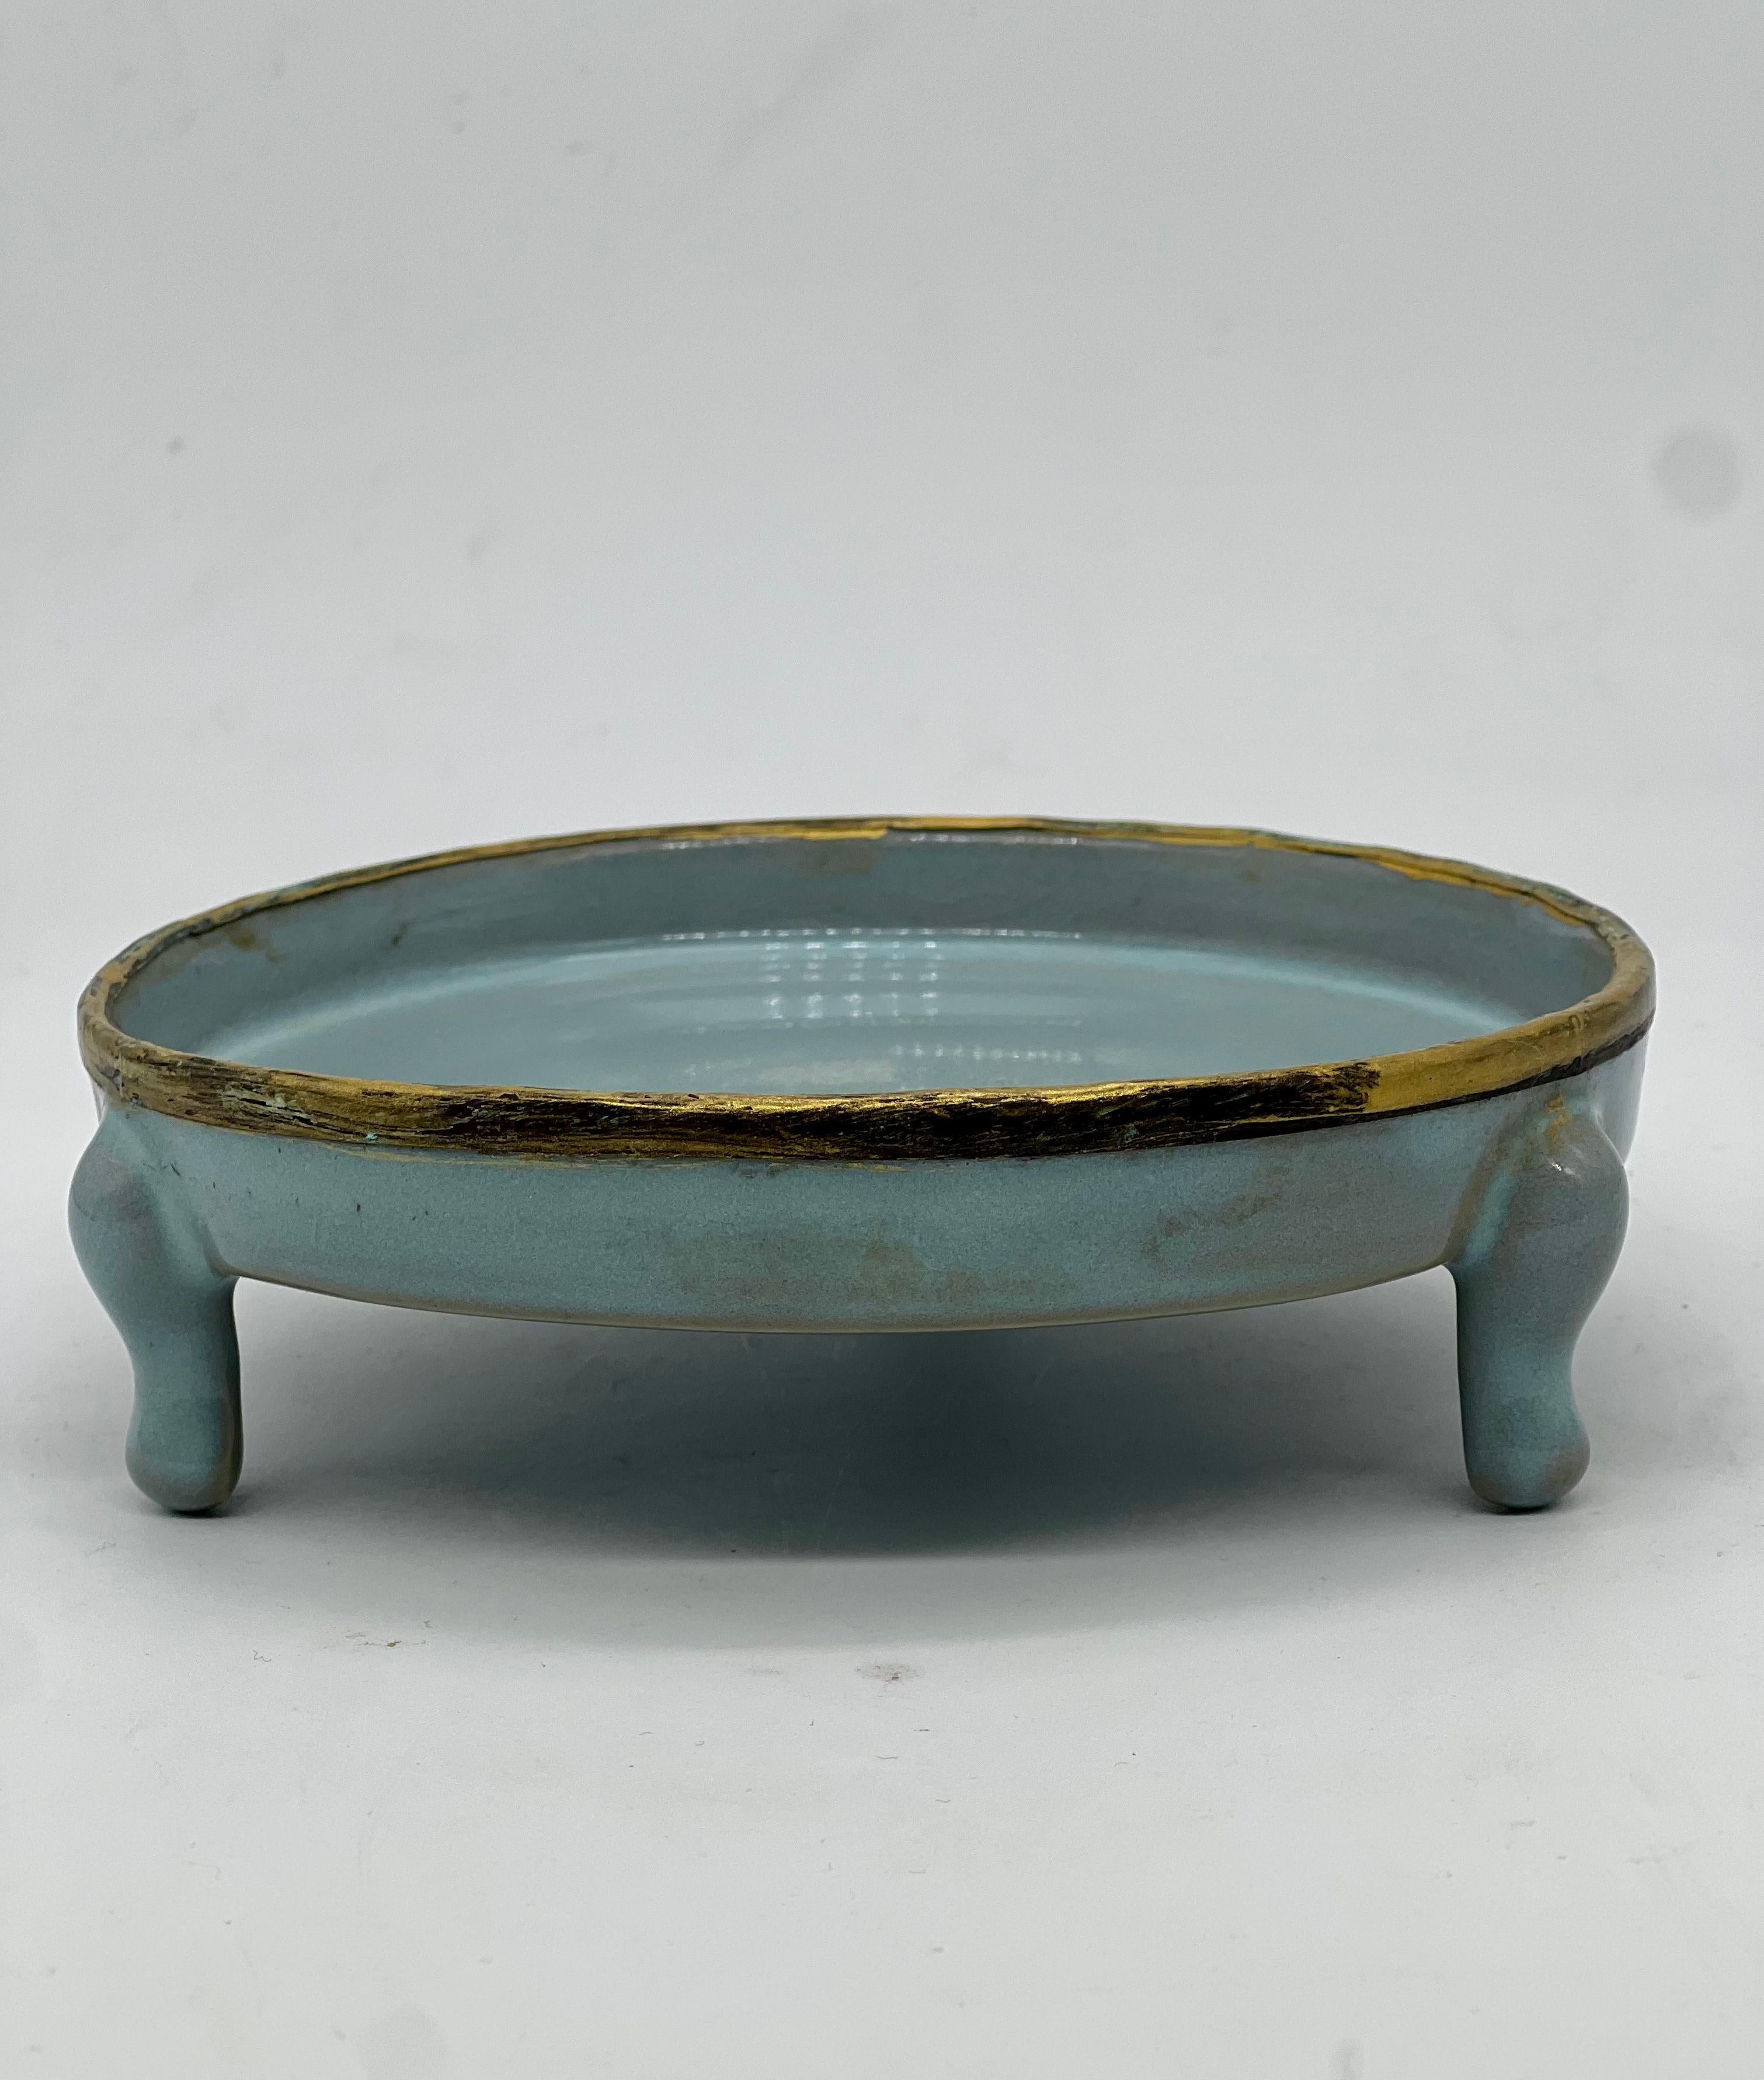 A FINE 19th C CHINESE THREE LEGGED RU WARE PORCELAIN WASHER/STAND.Qing Dynasty. For Sale 6